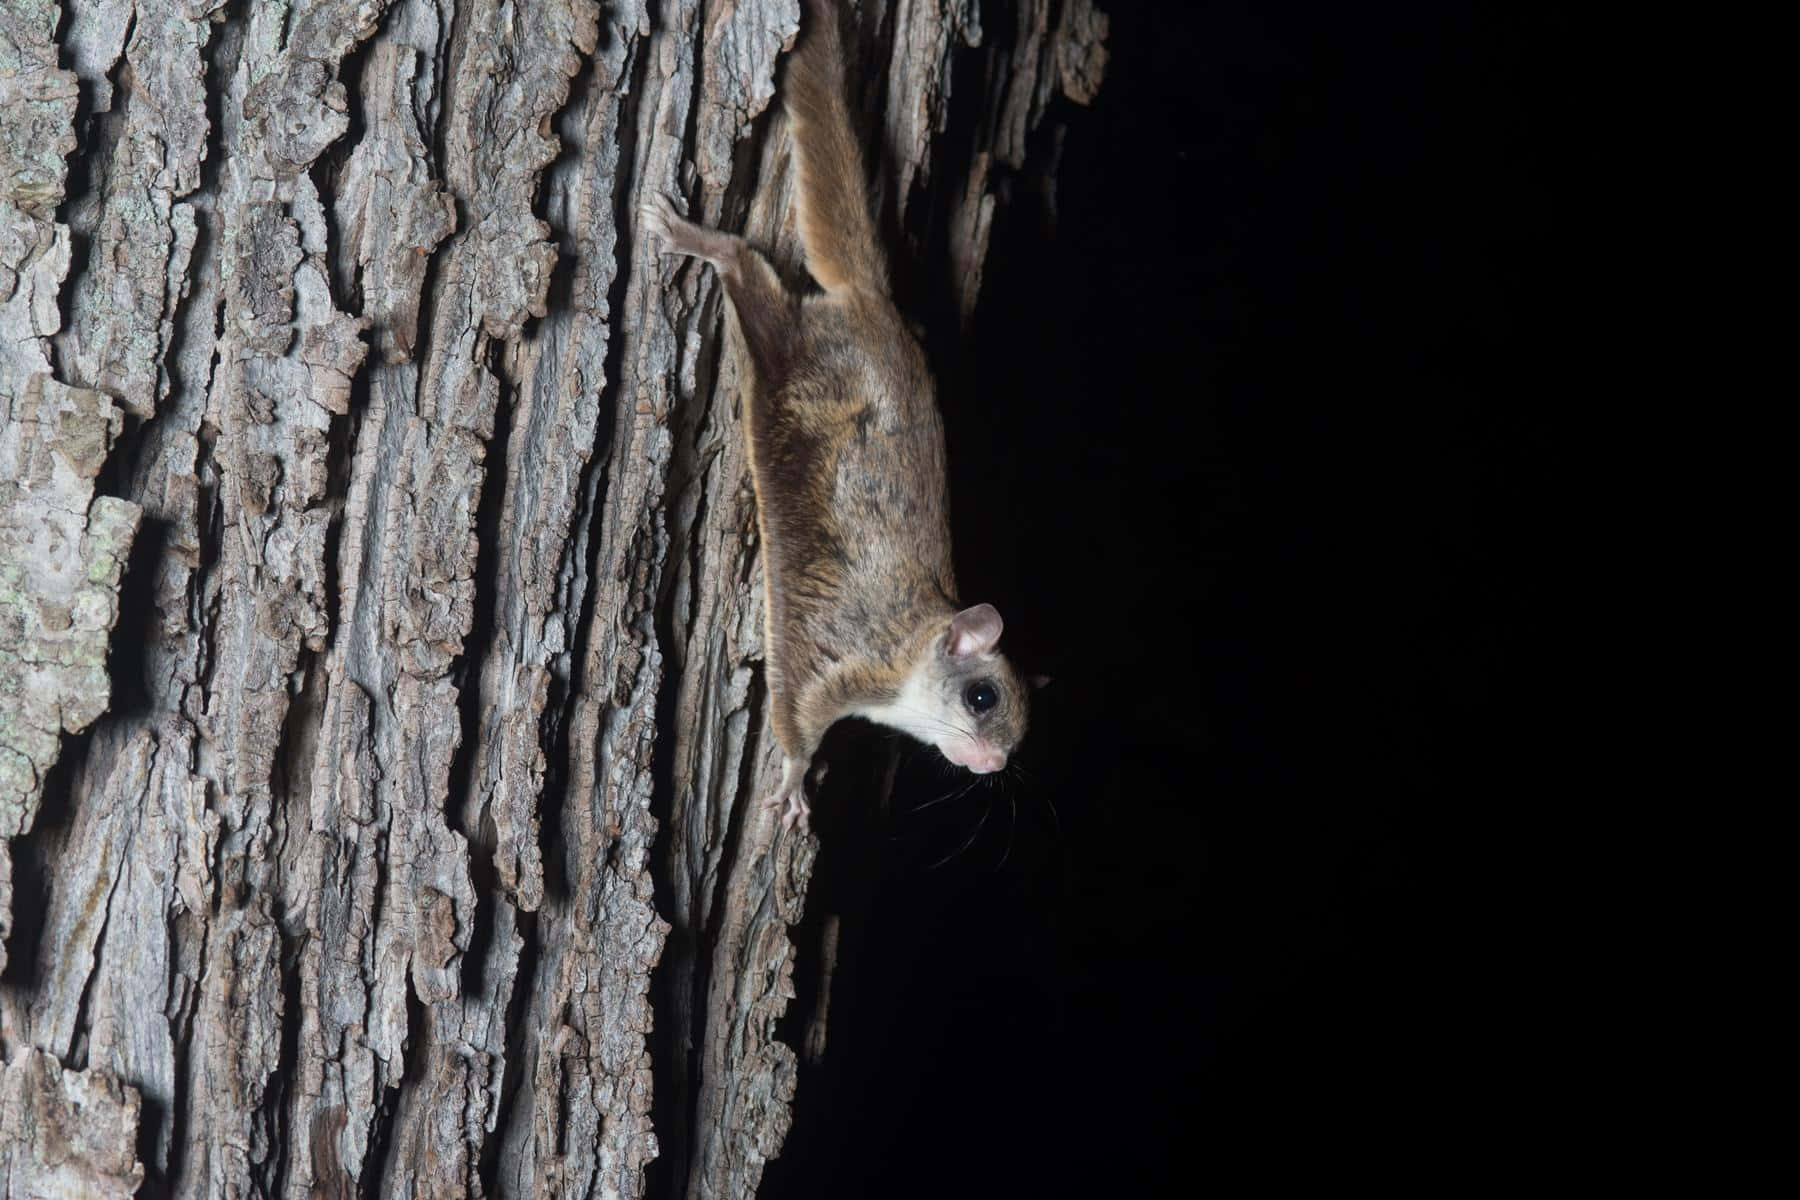 Take Flight With The Flying Squirrel